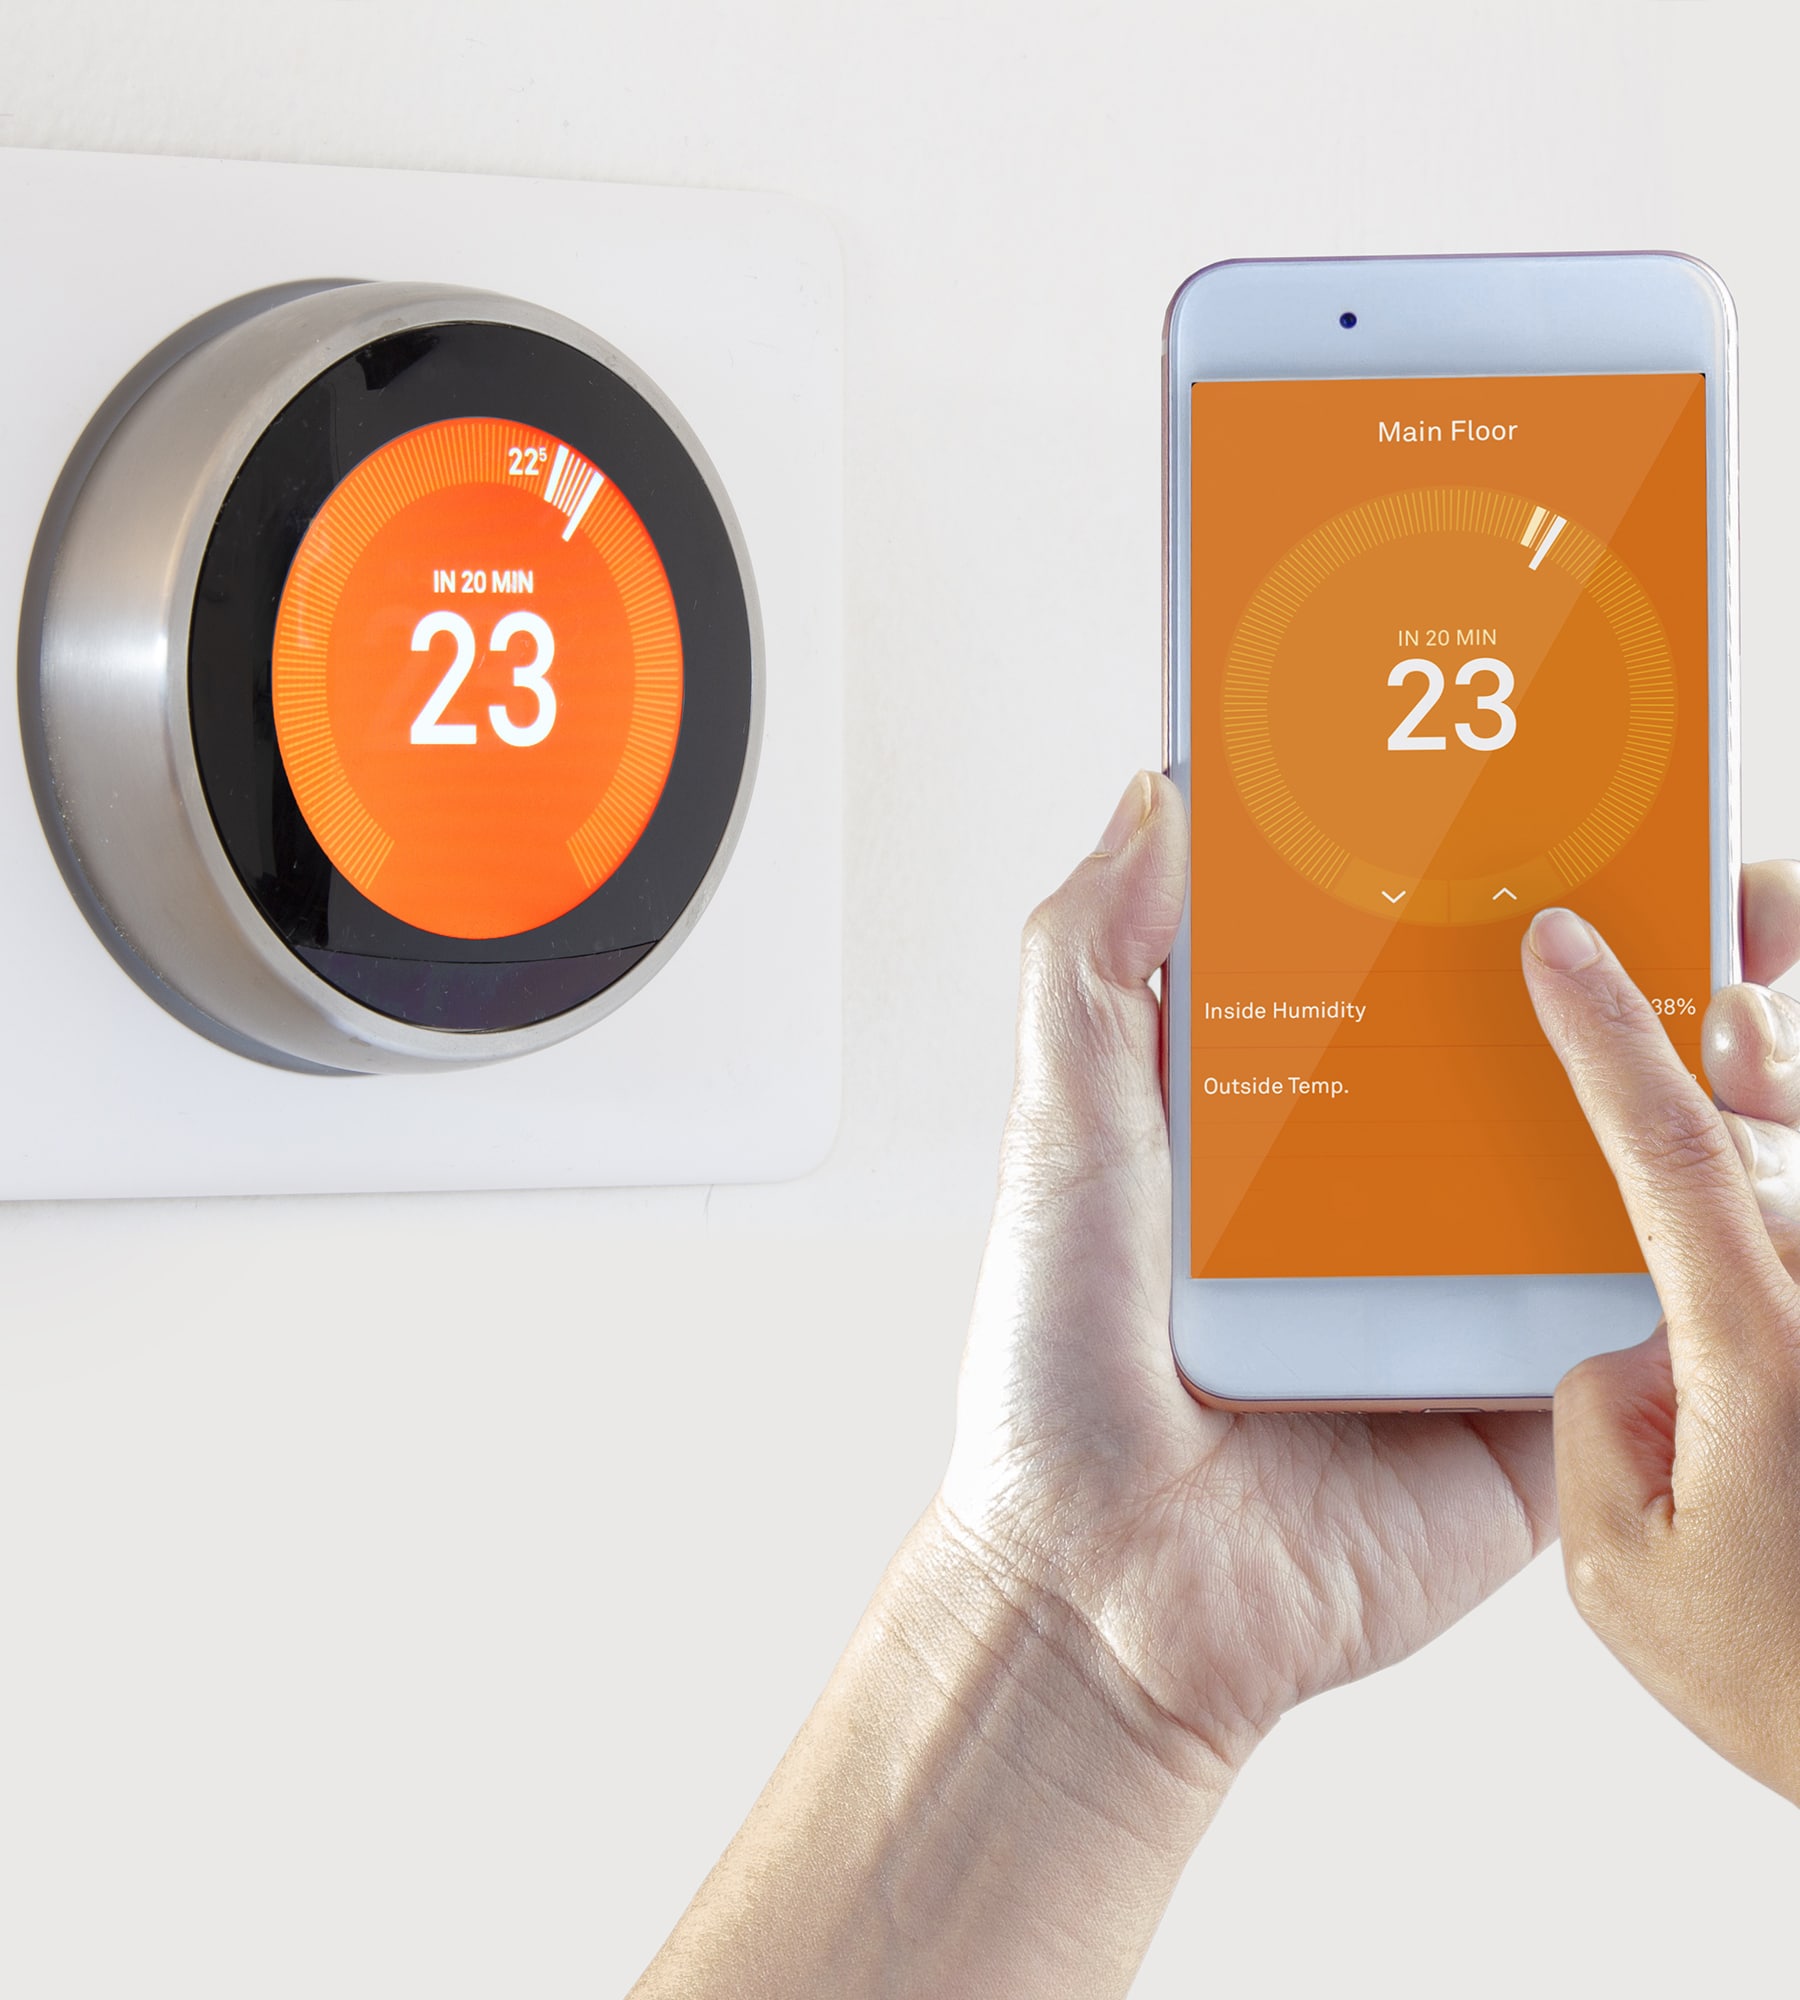 Smart Heating Systems